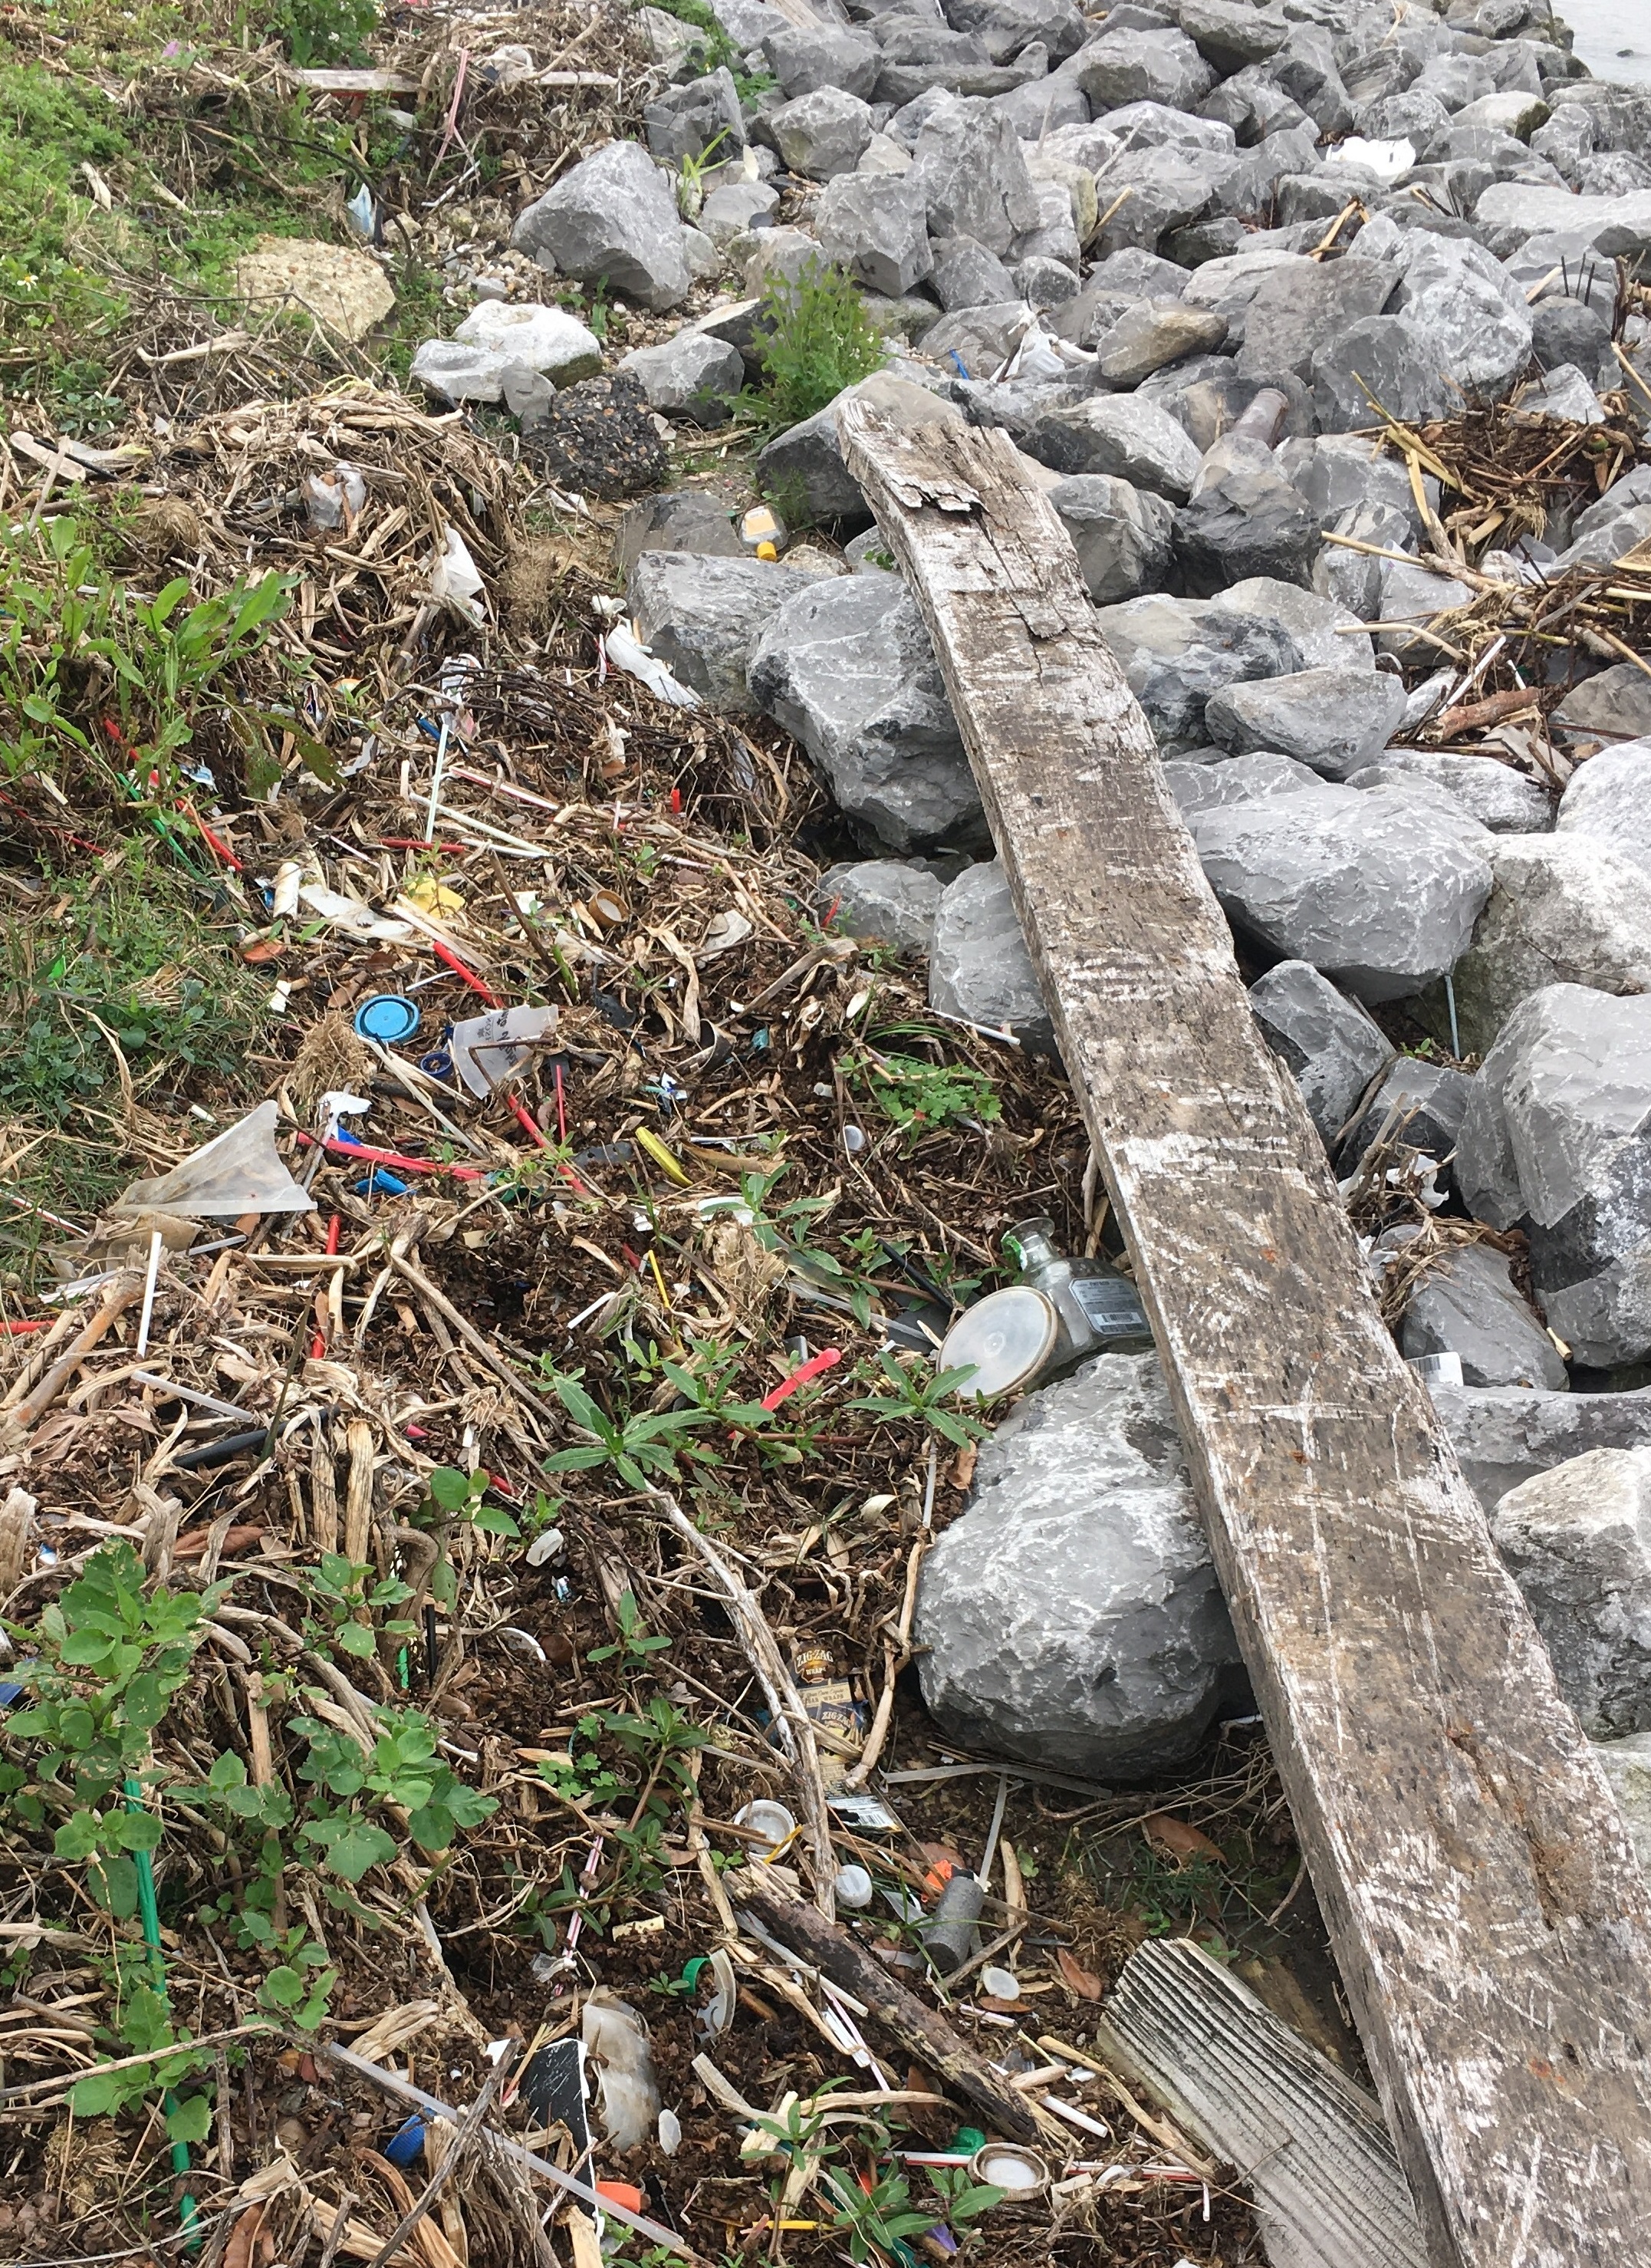 Trash near the shoreline can end up in the water due to rainstorms, high tides, and wind.